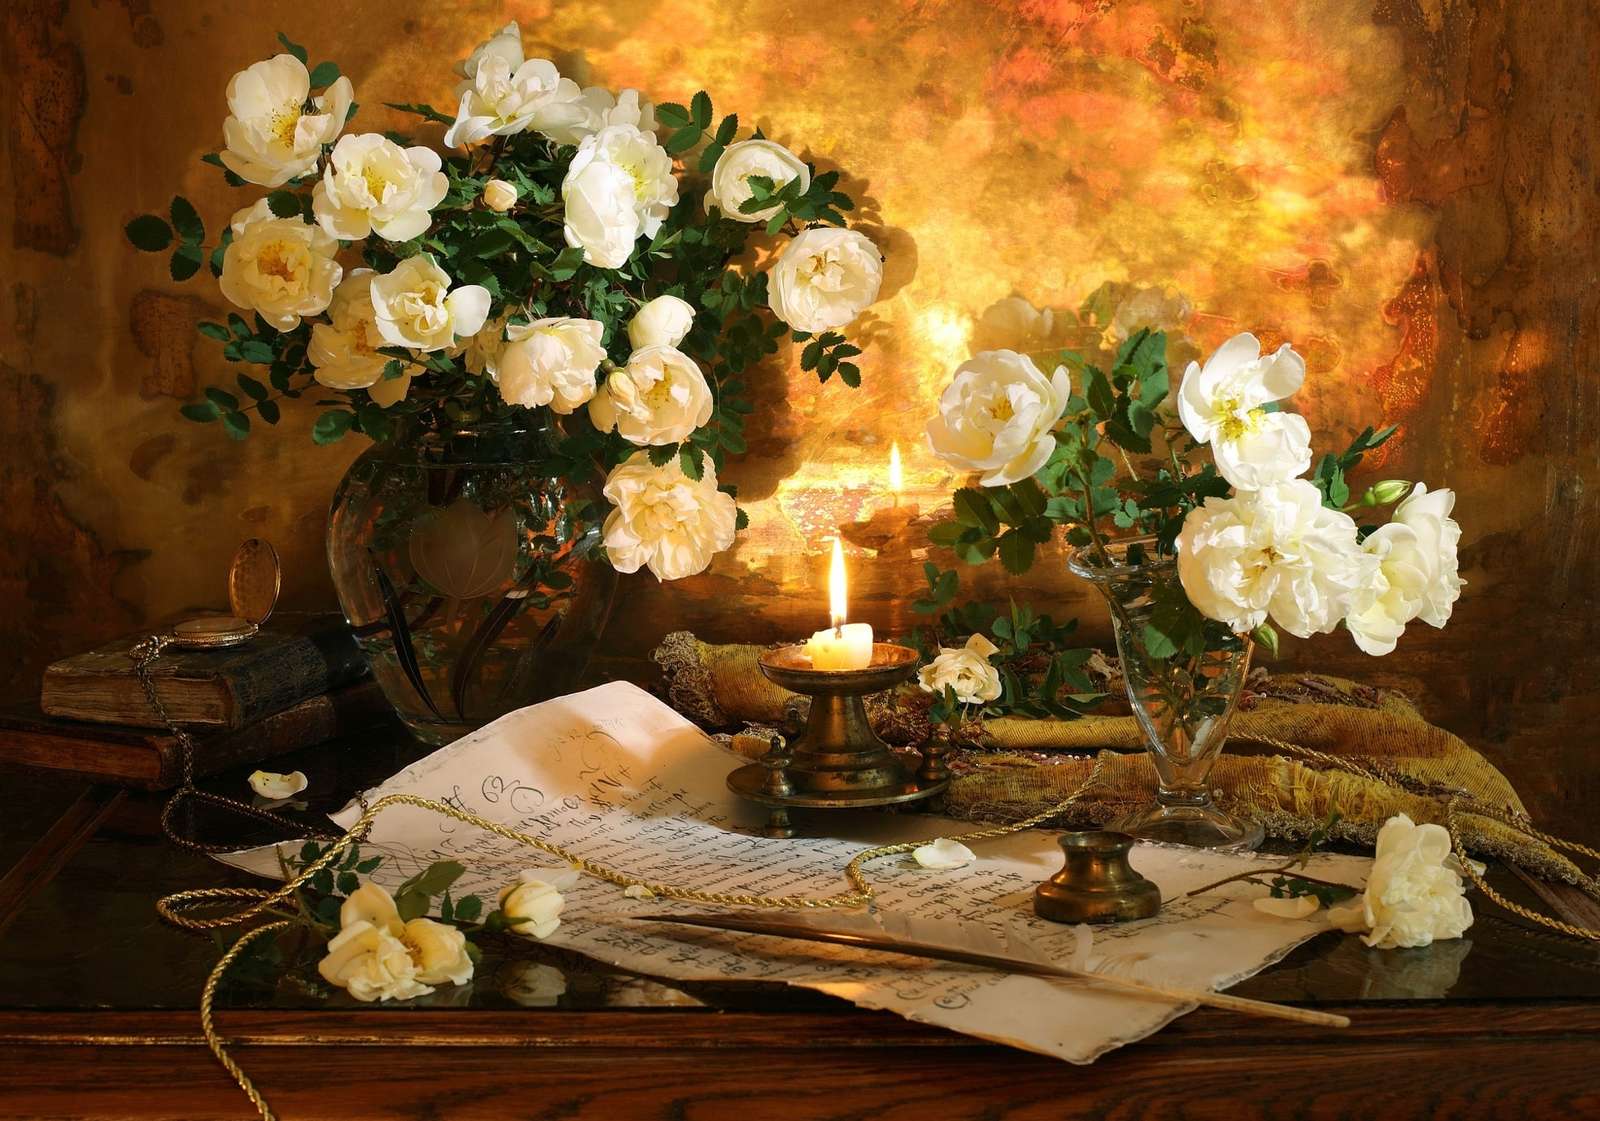 A candlestick on a manuscript next to a vase of flowers jigsaw puzzle online